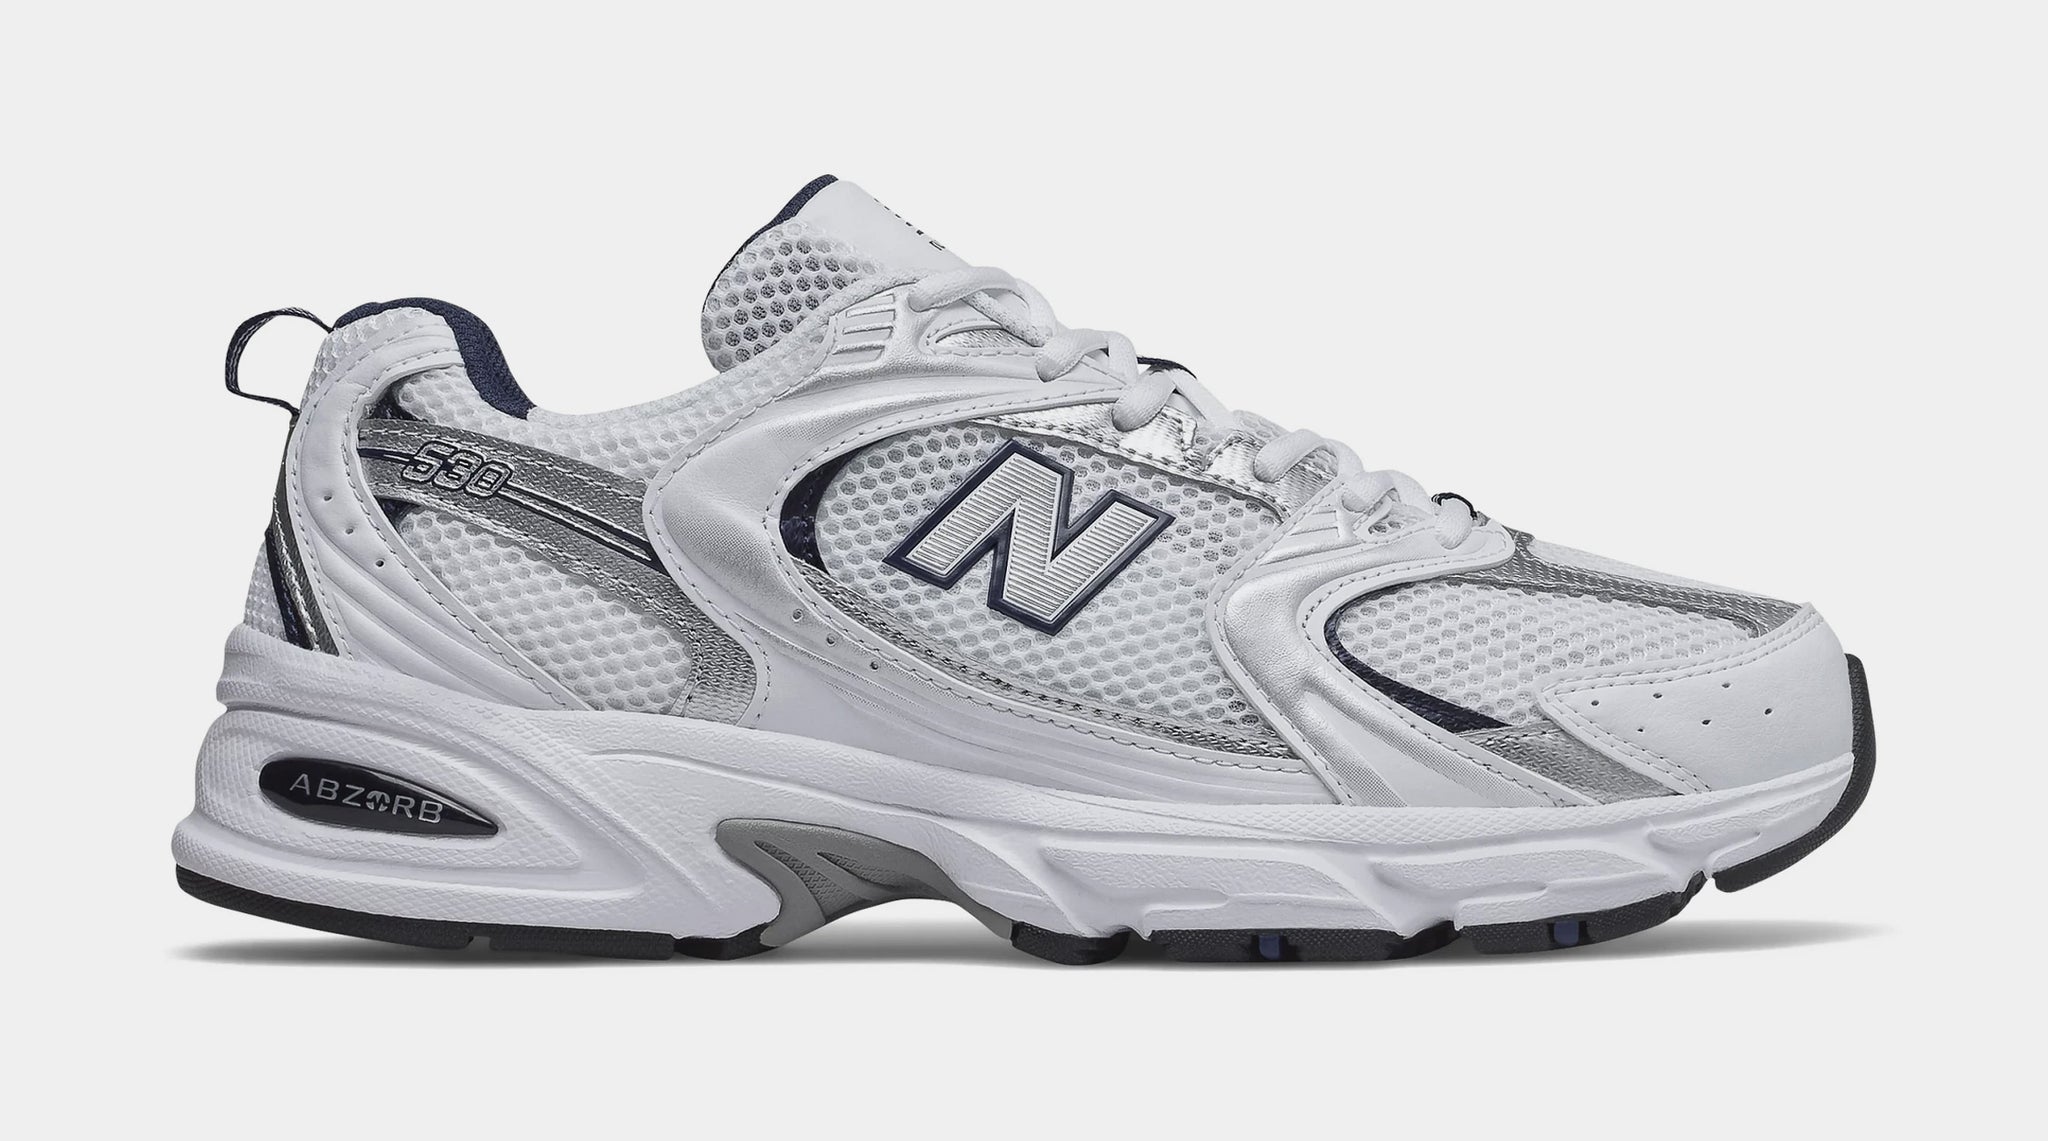 New Balance 530 White Silver Navy | Swag shoes, Sneakers fashion, Trendy shoes  sneakers